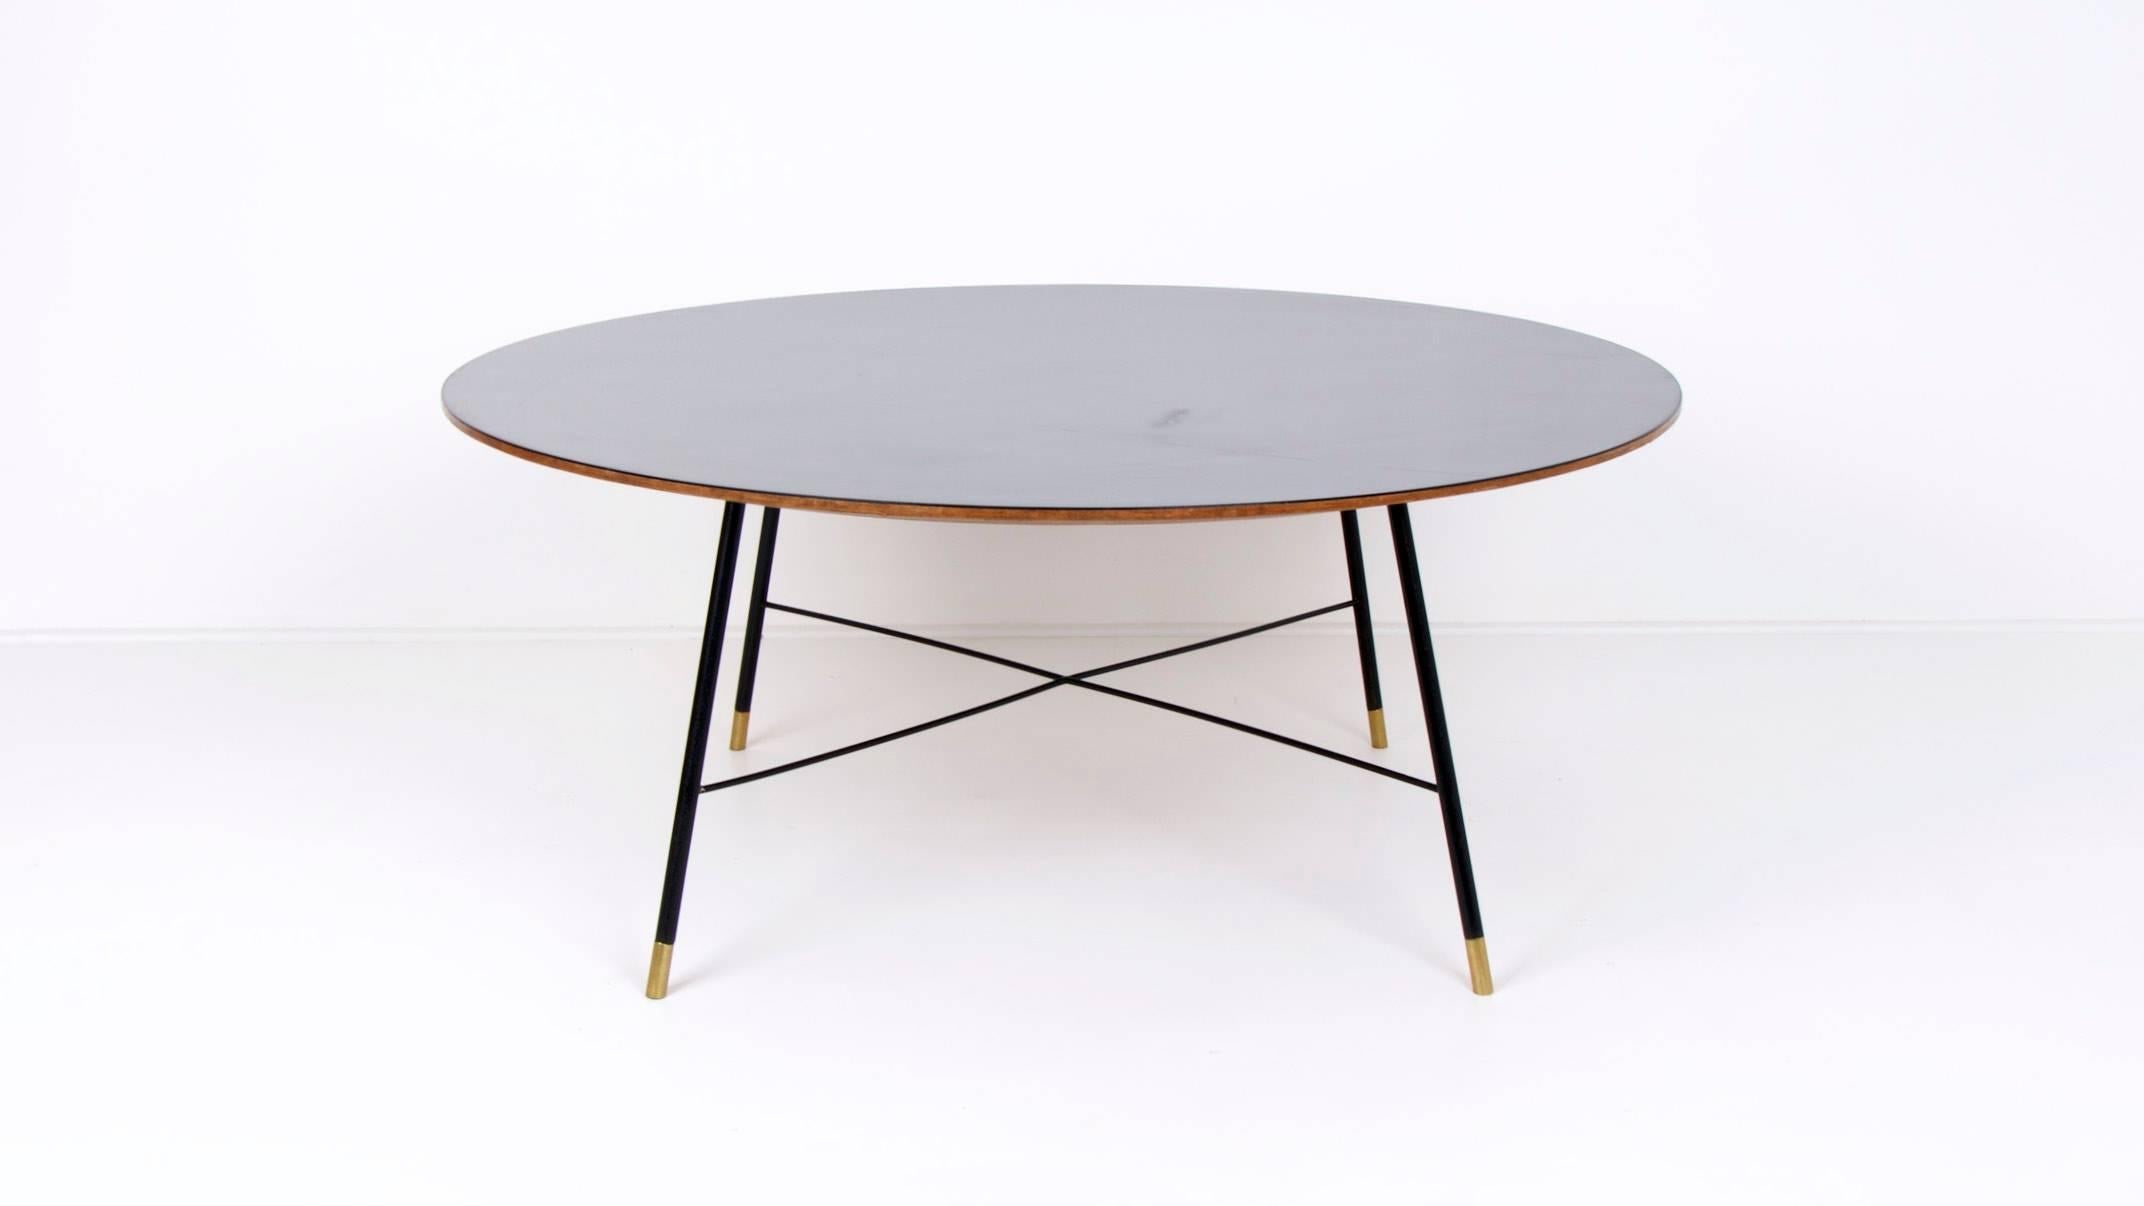 A very elegant black round coffee table made by the Italian designer Ico Parisi in the 1950s.